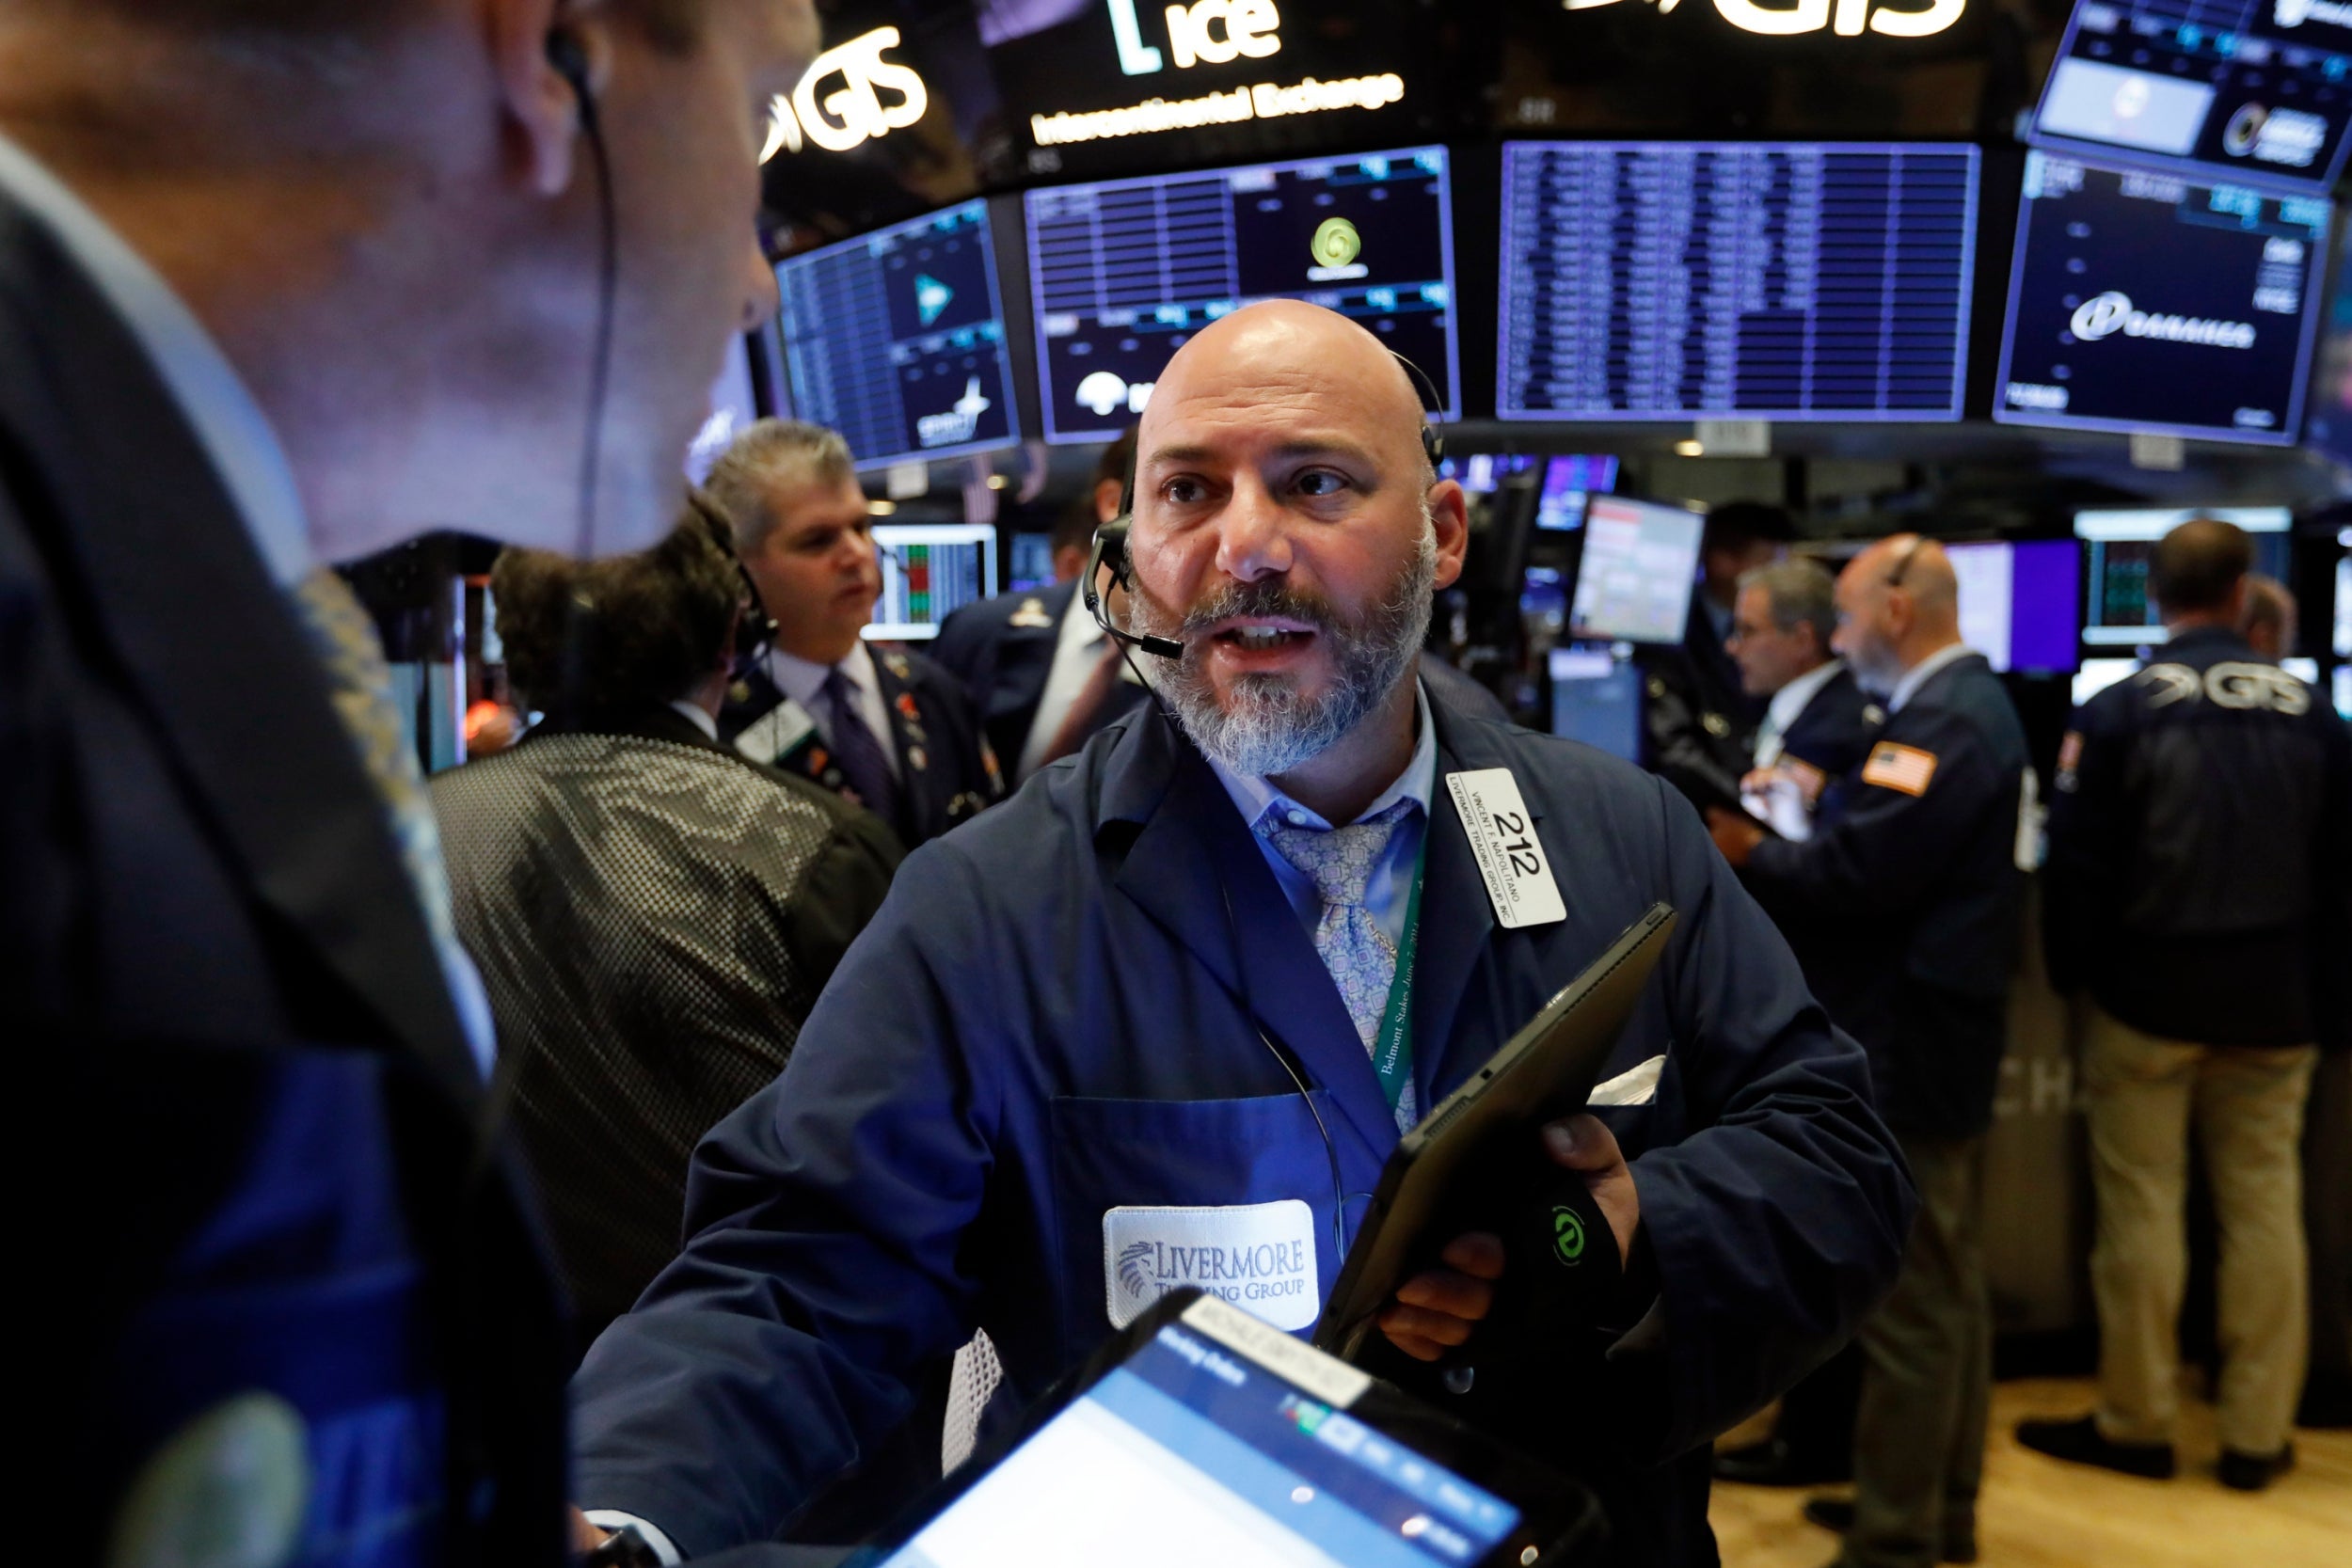 Wall Street reacted positively to the news with the Dow Jones and S&P 500 both rising around 1.5 per cent